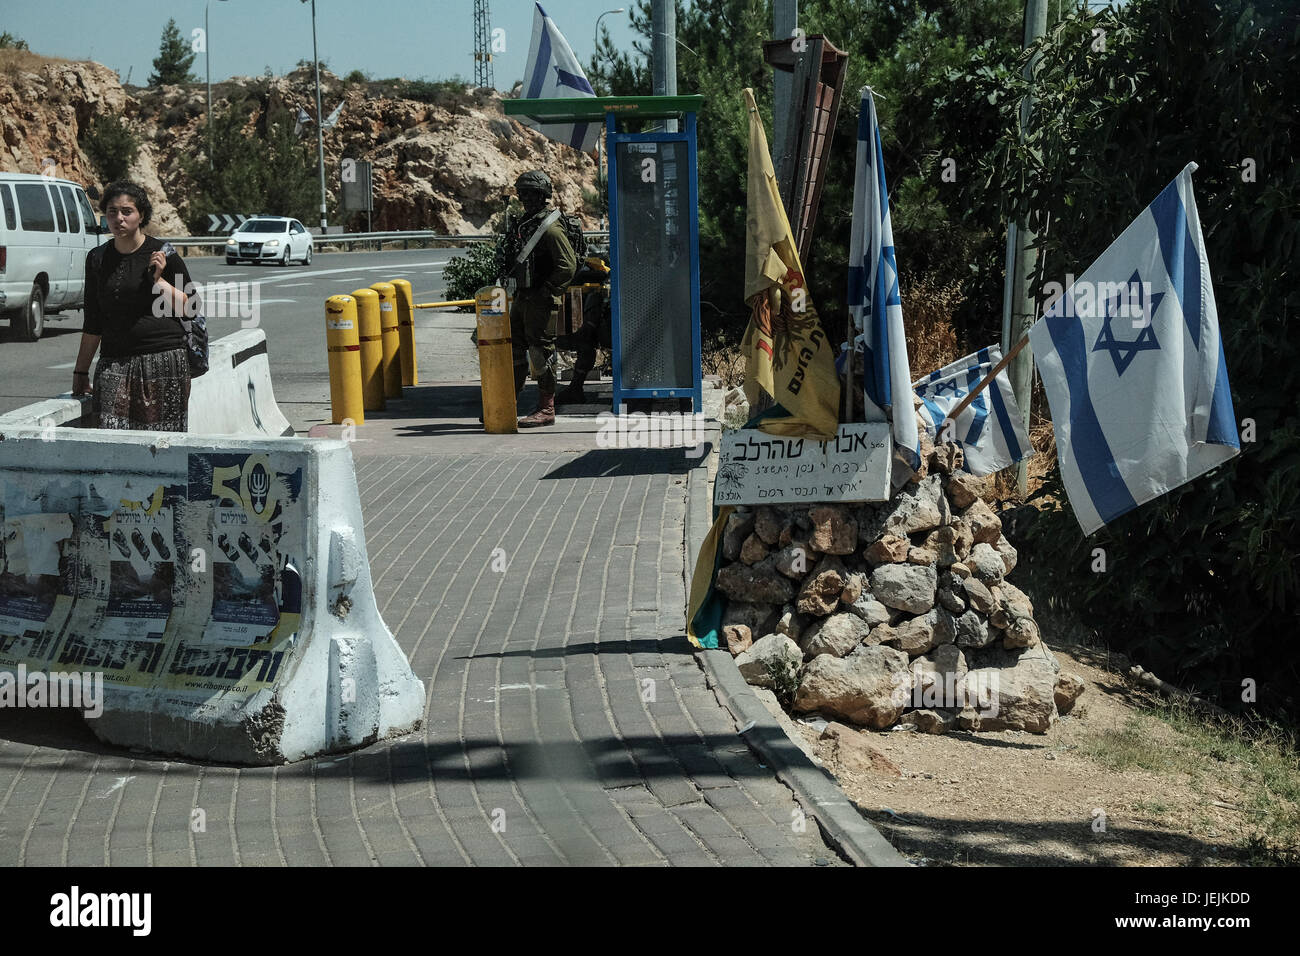 Ofra, West Bank. 26th June, 2017. West Bank settlement Ofra residents, lacking public transportation and reliant on hitchhiking, do so behind concrete barriers and under IDF security at the Ofra Junction. Credit: Nir Alon/Alamy Live News Stock Photo